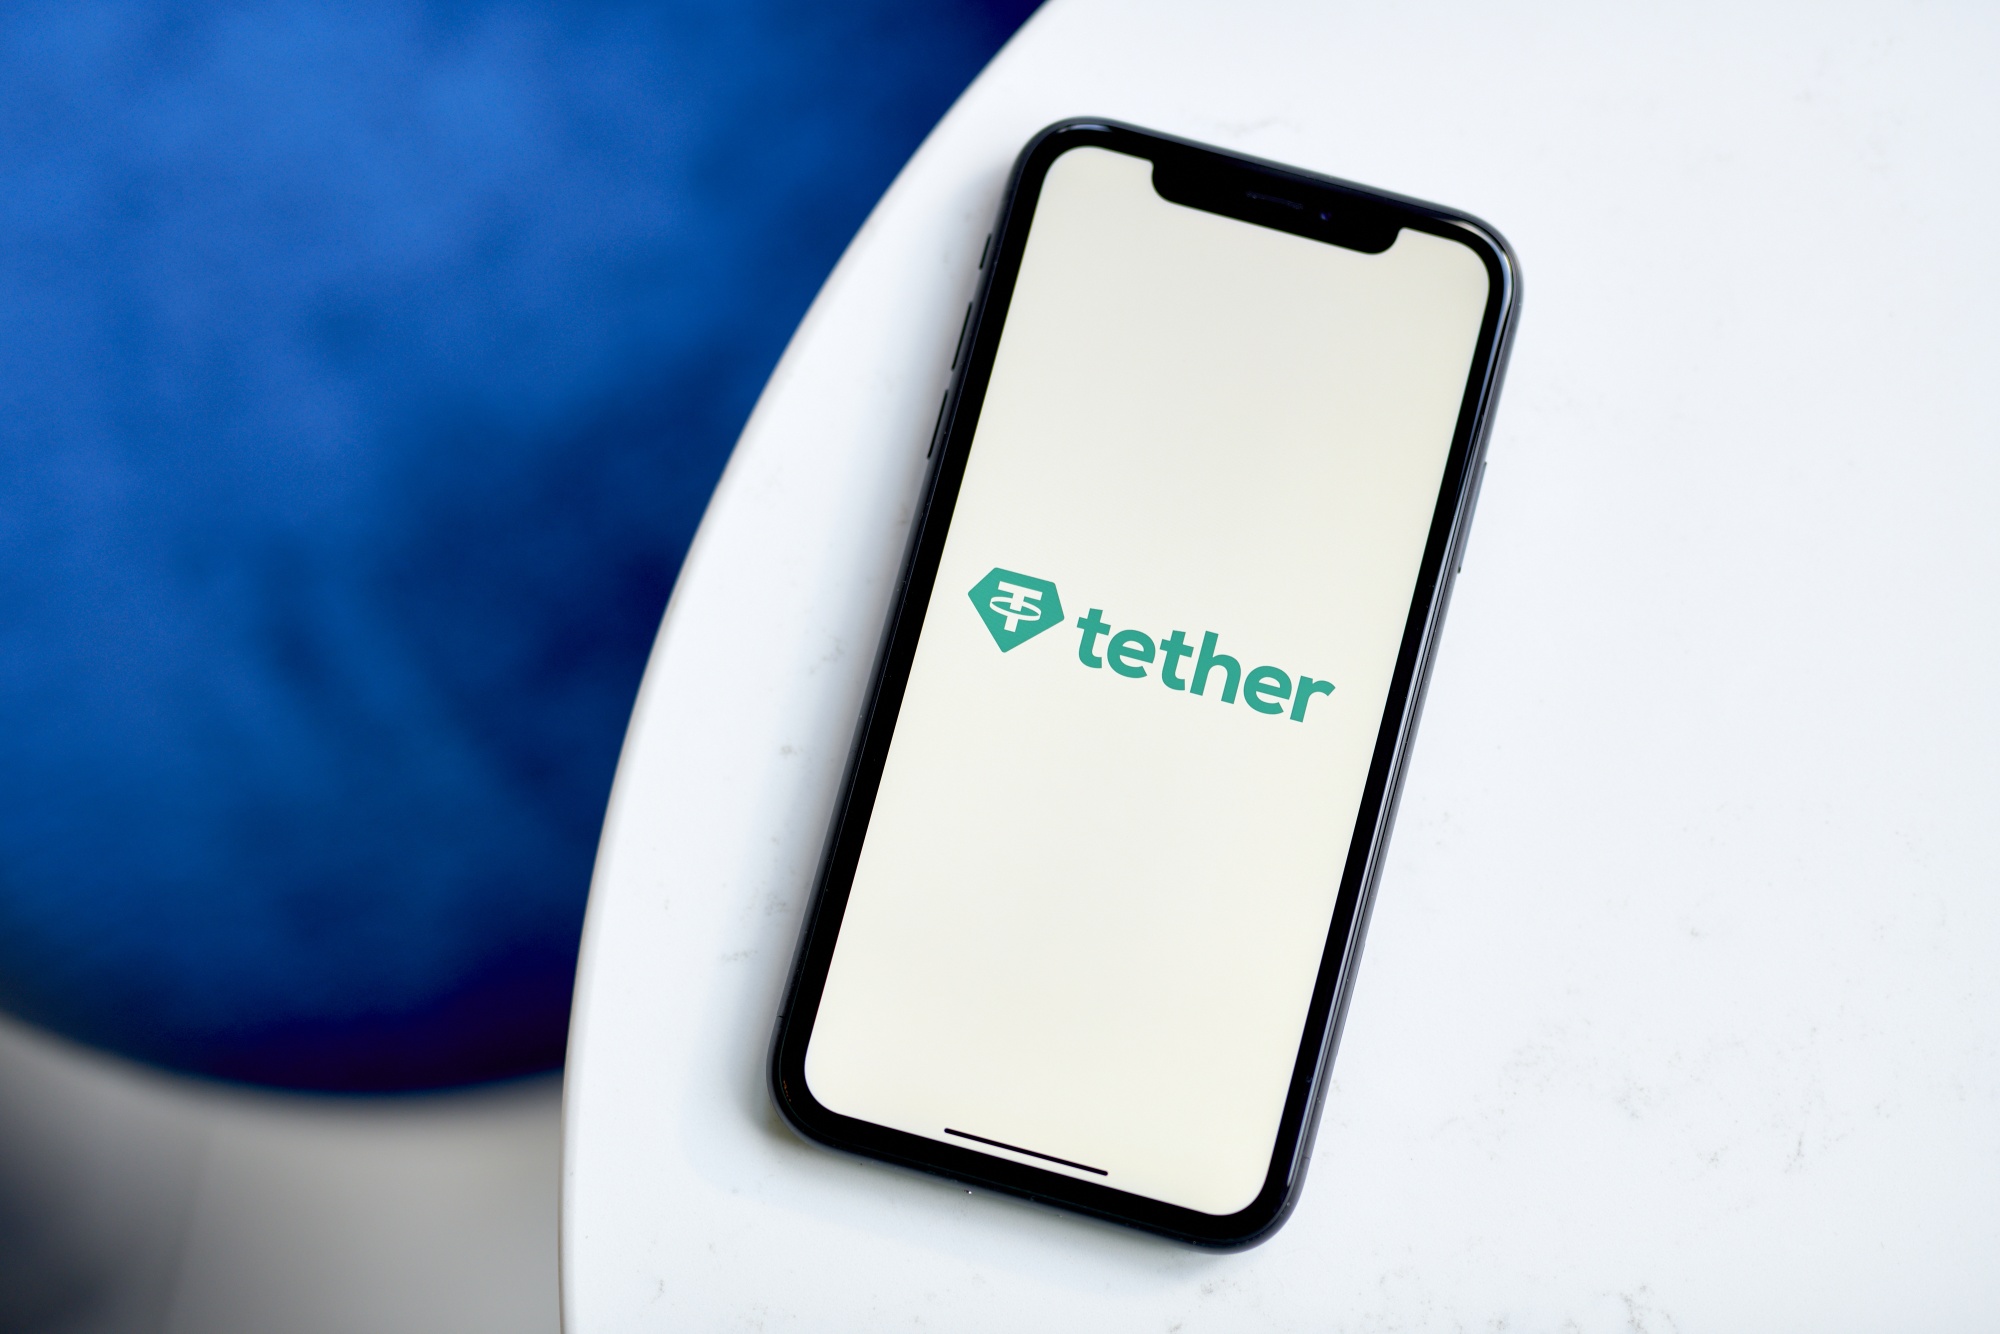 King Tether: 39% Of Cryptocurrency Exchanges Carry USDT